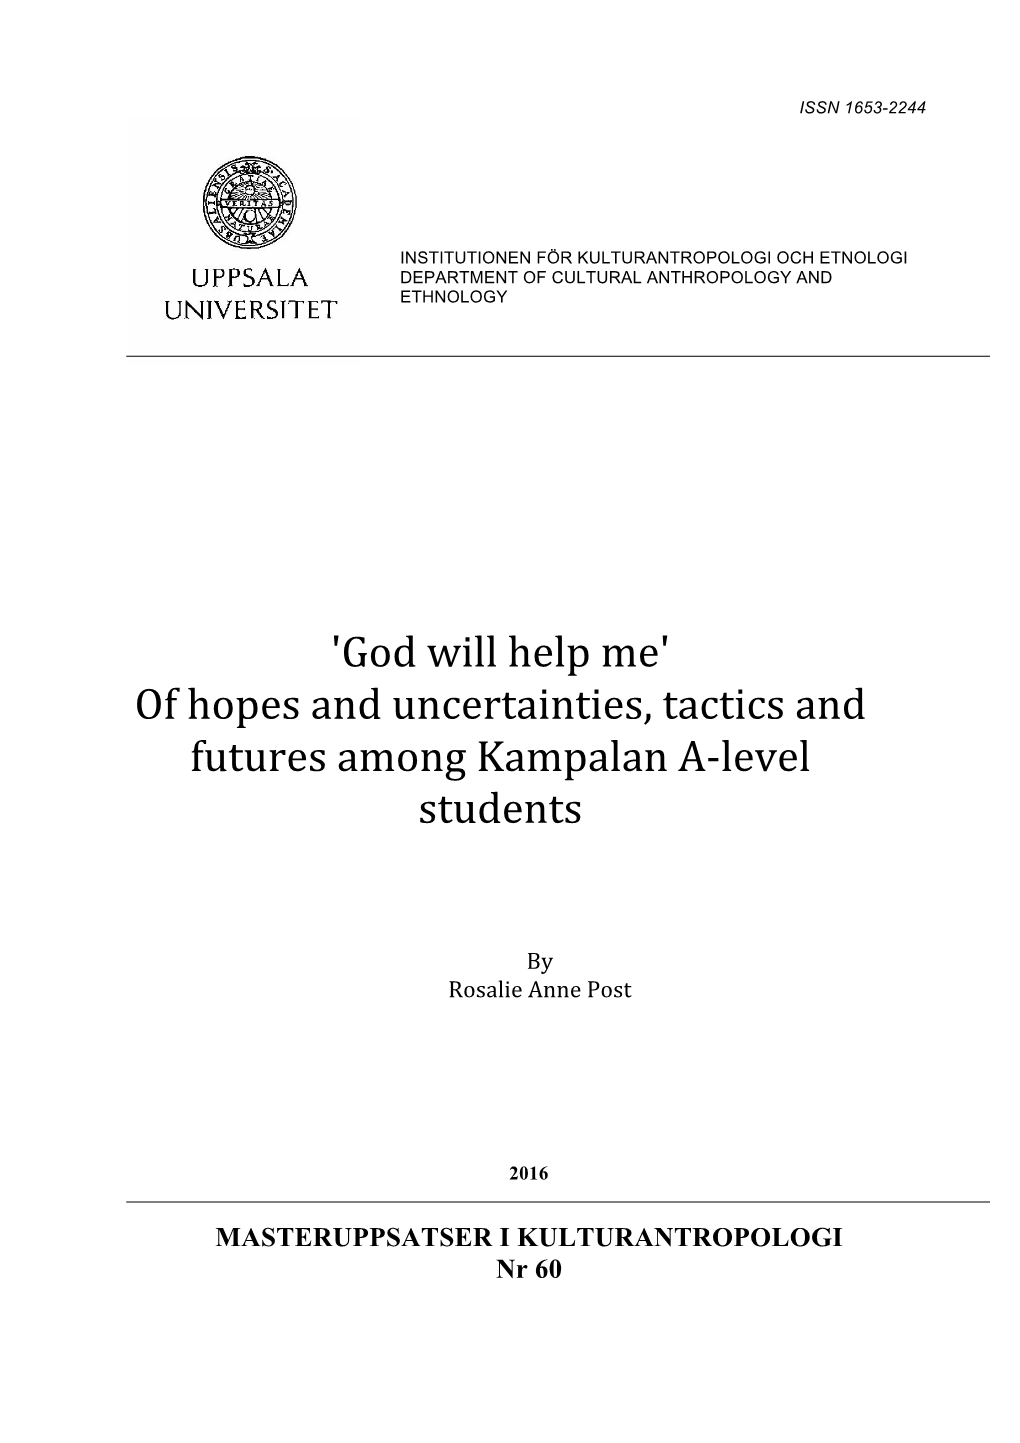 God Will Help Me' of Hopes and Uncertainties, Tactics and Futures Among Kampalan A-Level Students